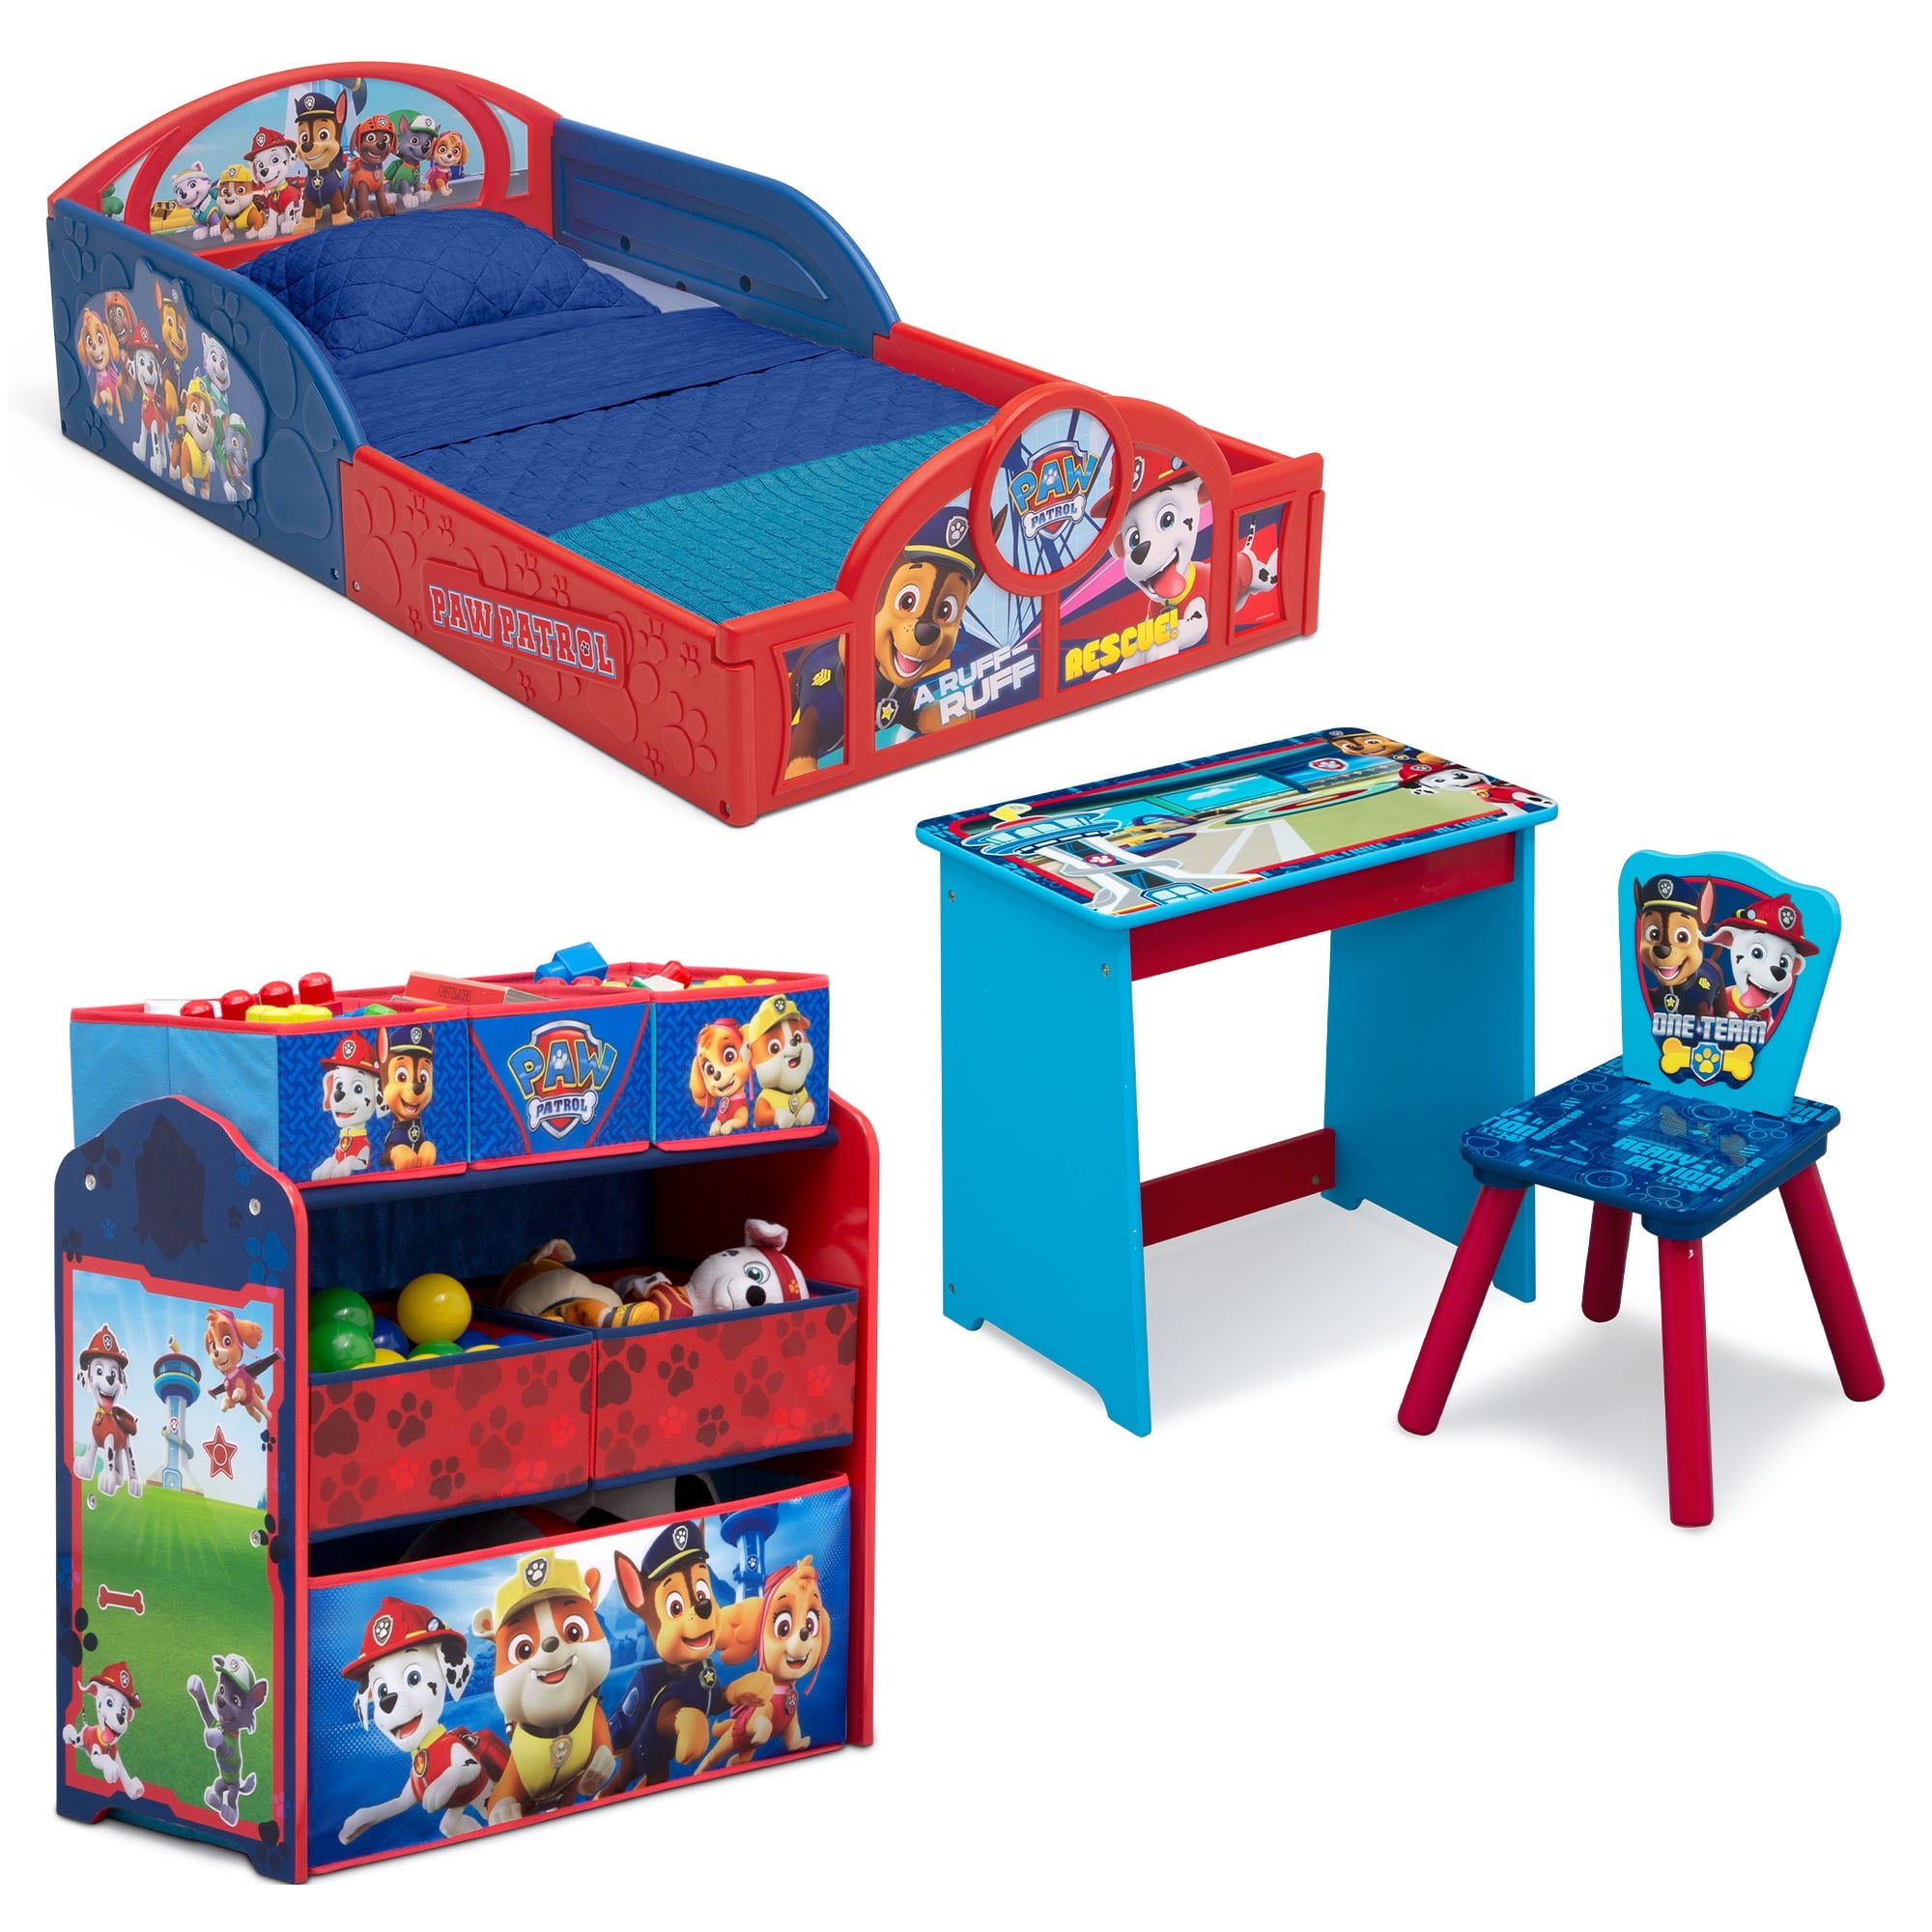 PAW Patrol Toddler Bed with High Side Rails Kids Strong Wood Furniture Nick Jr. 